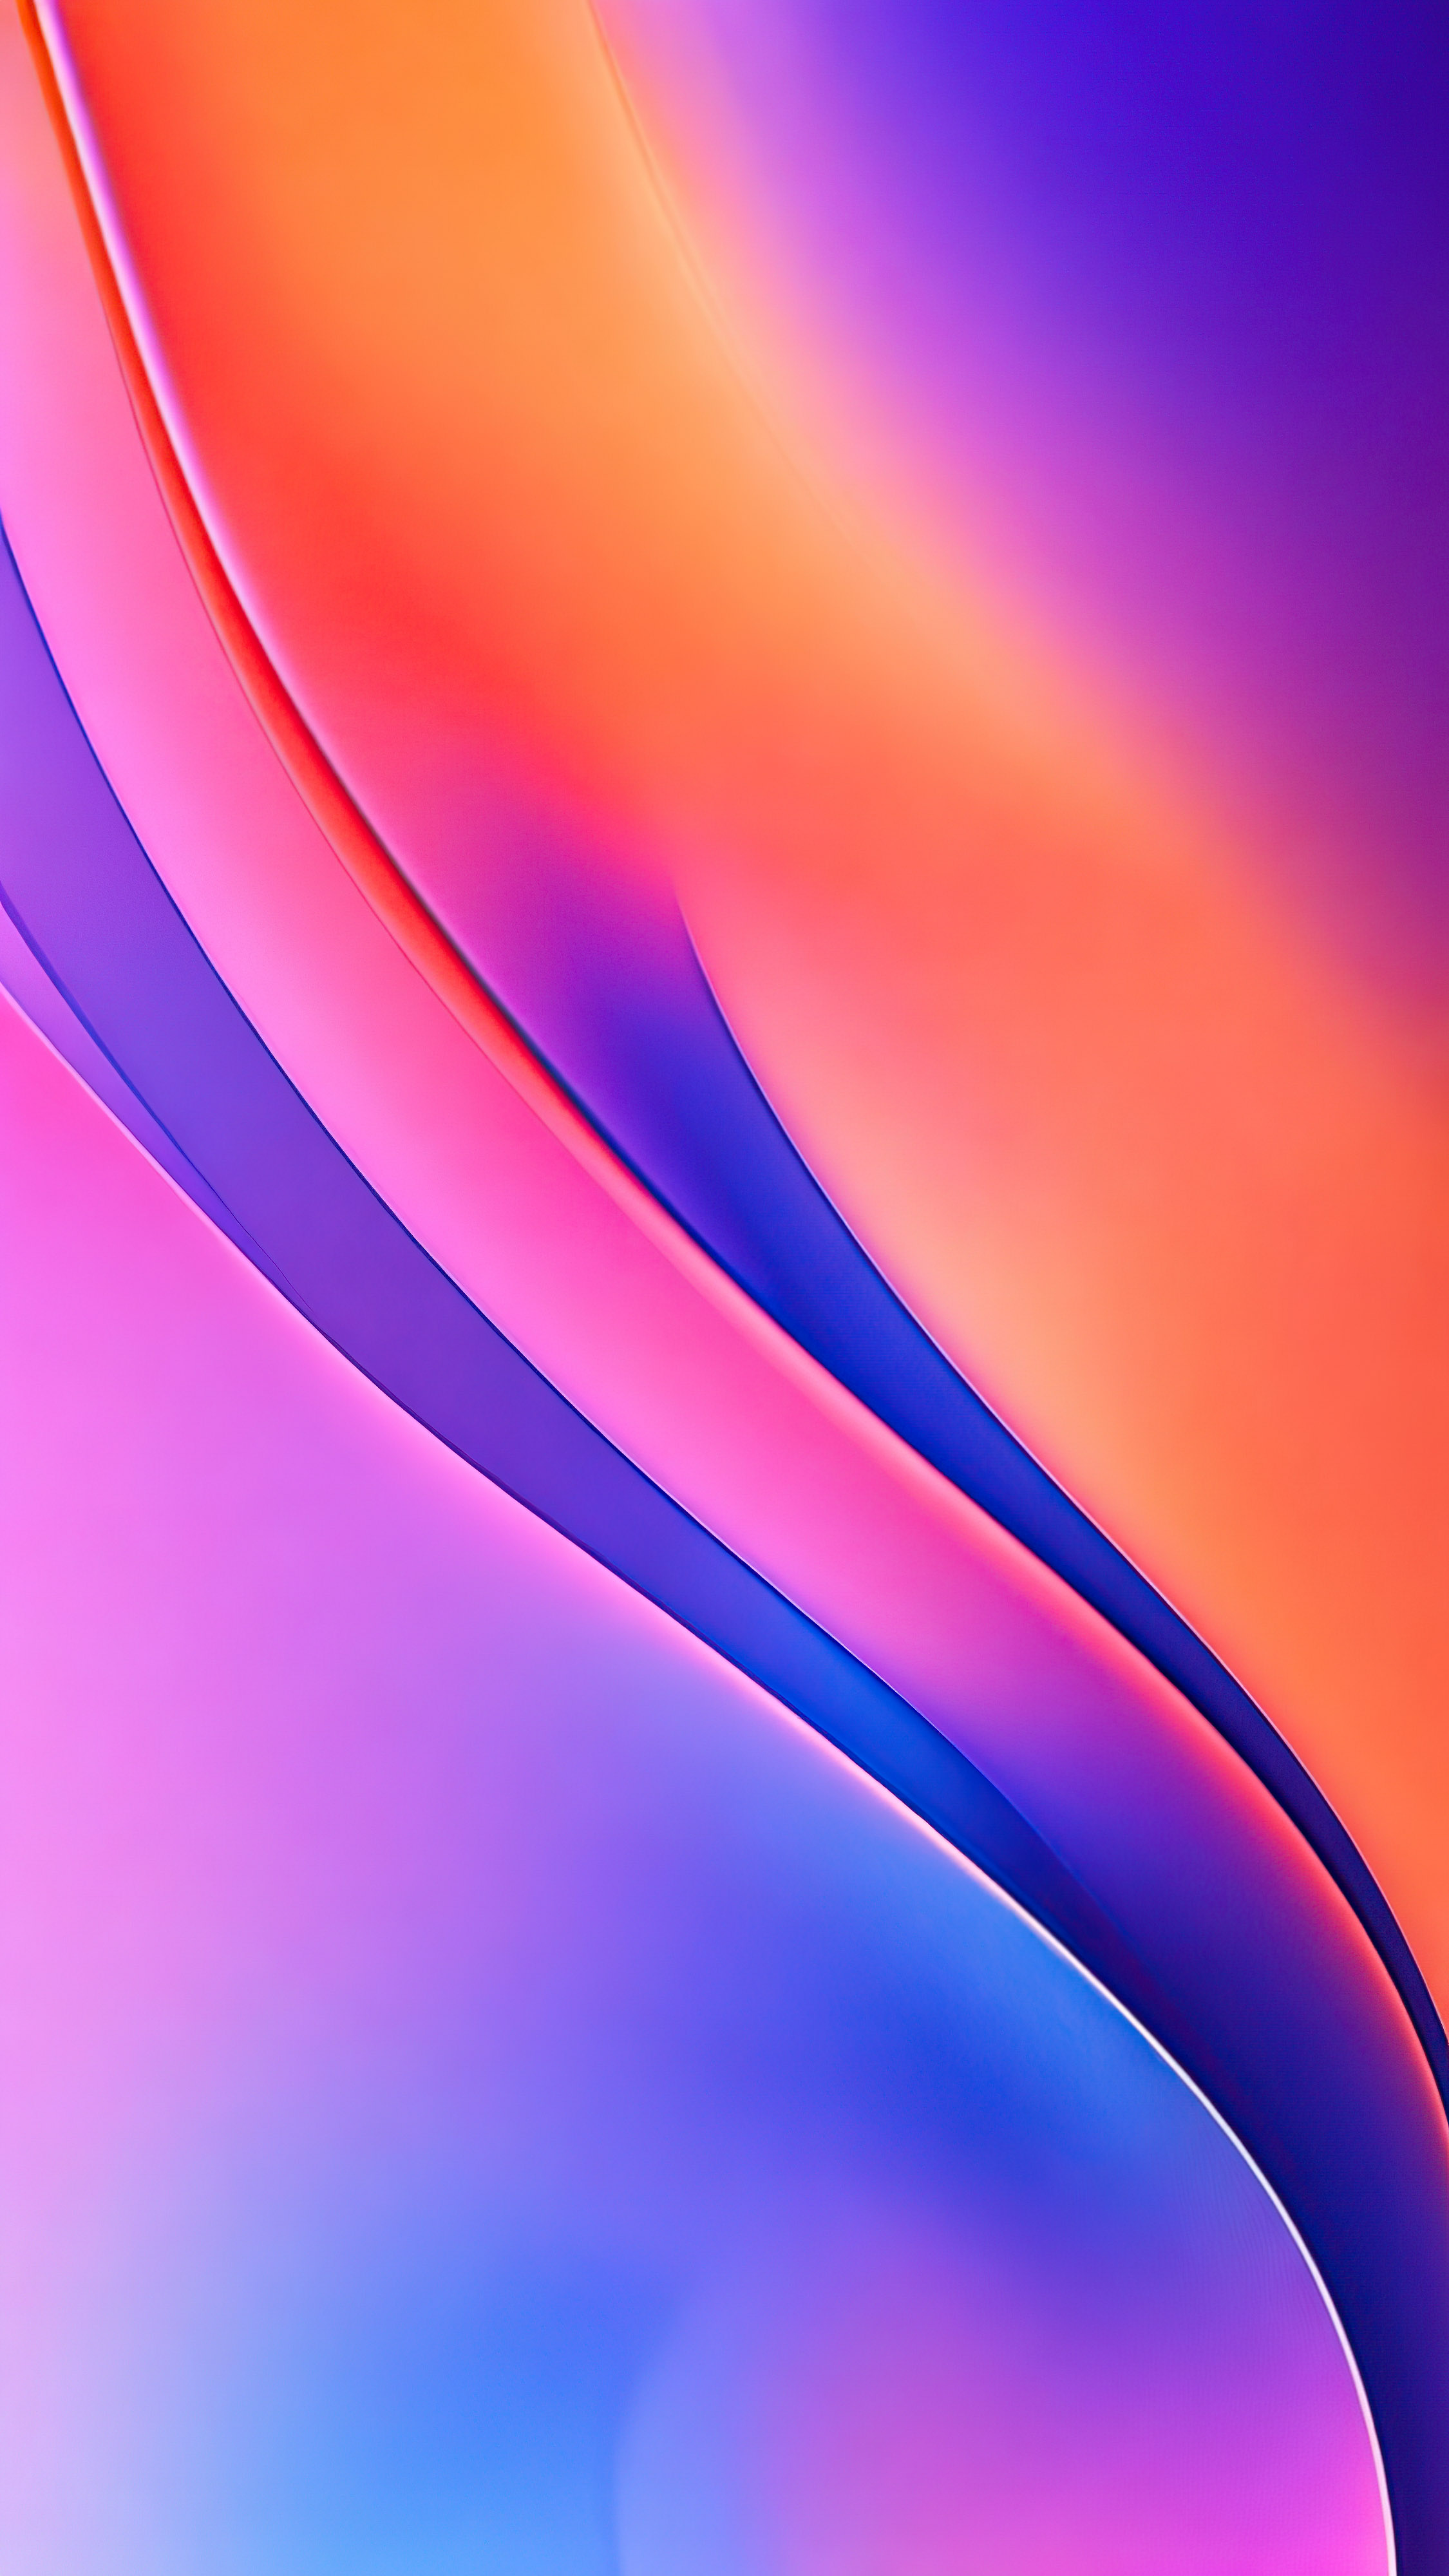 Admire the elegance of 4K Ultra HD gradient wallpaper for iPhone, with an abstract digital artwork featuring smooth, flowing shapes adorned with gradient colors.